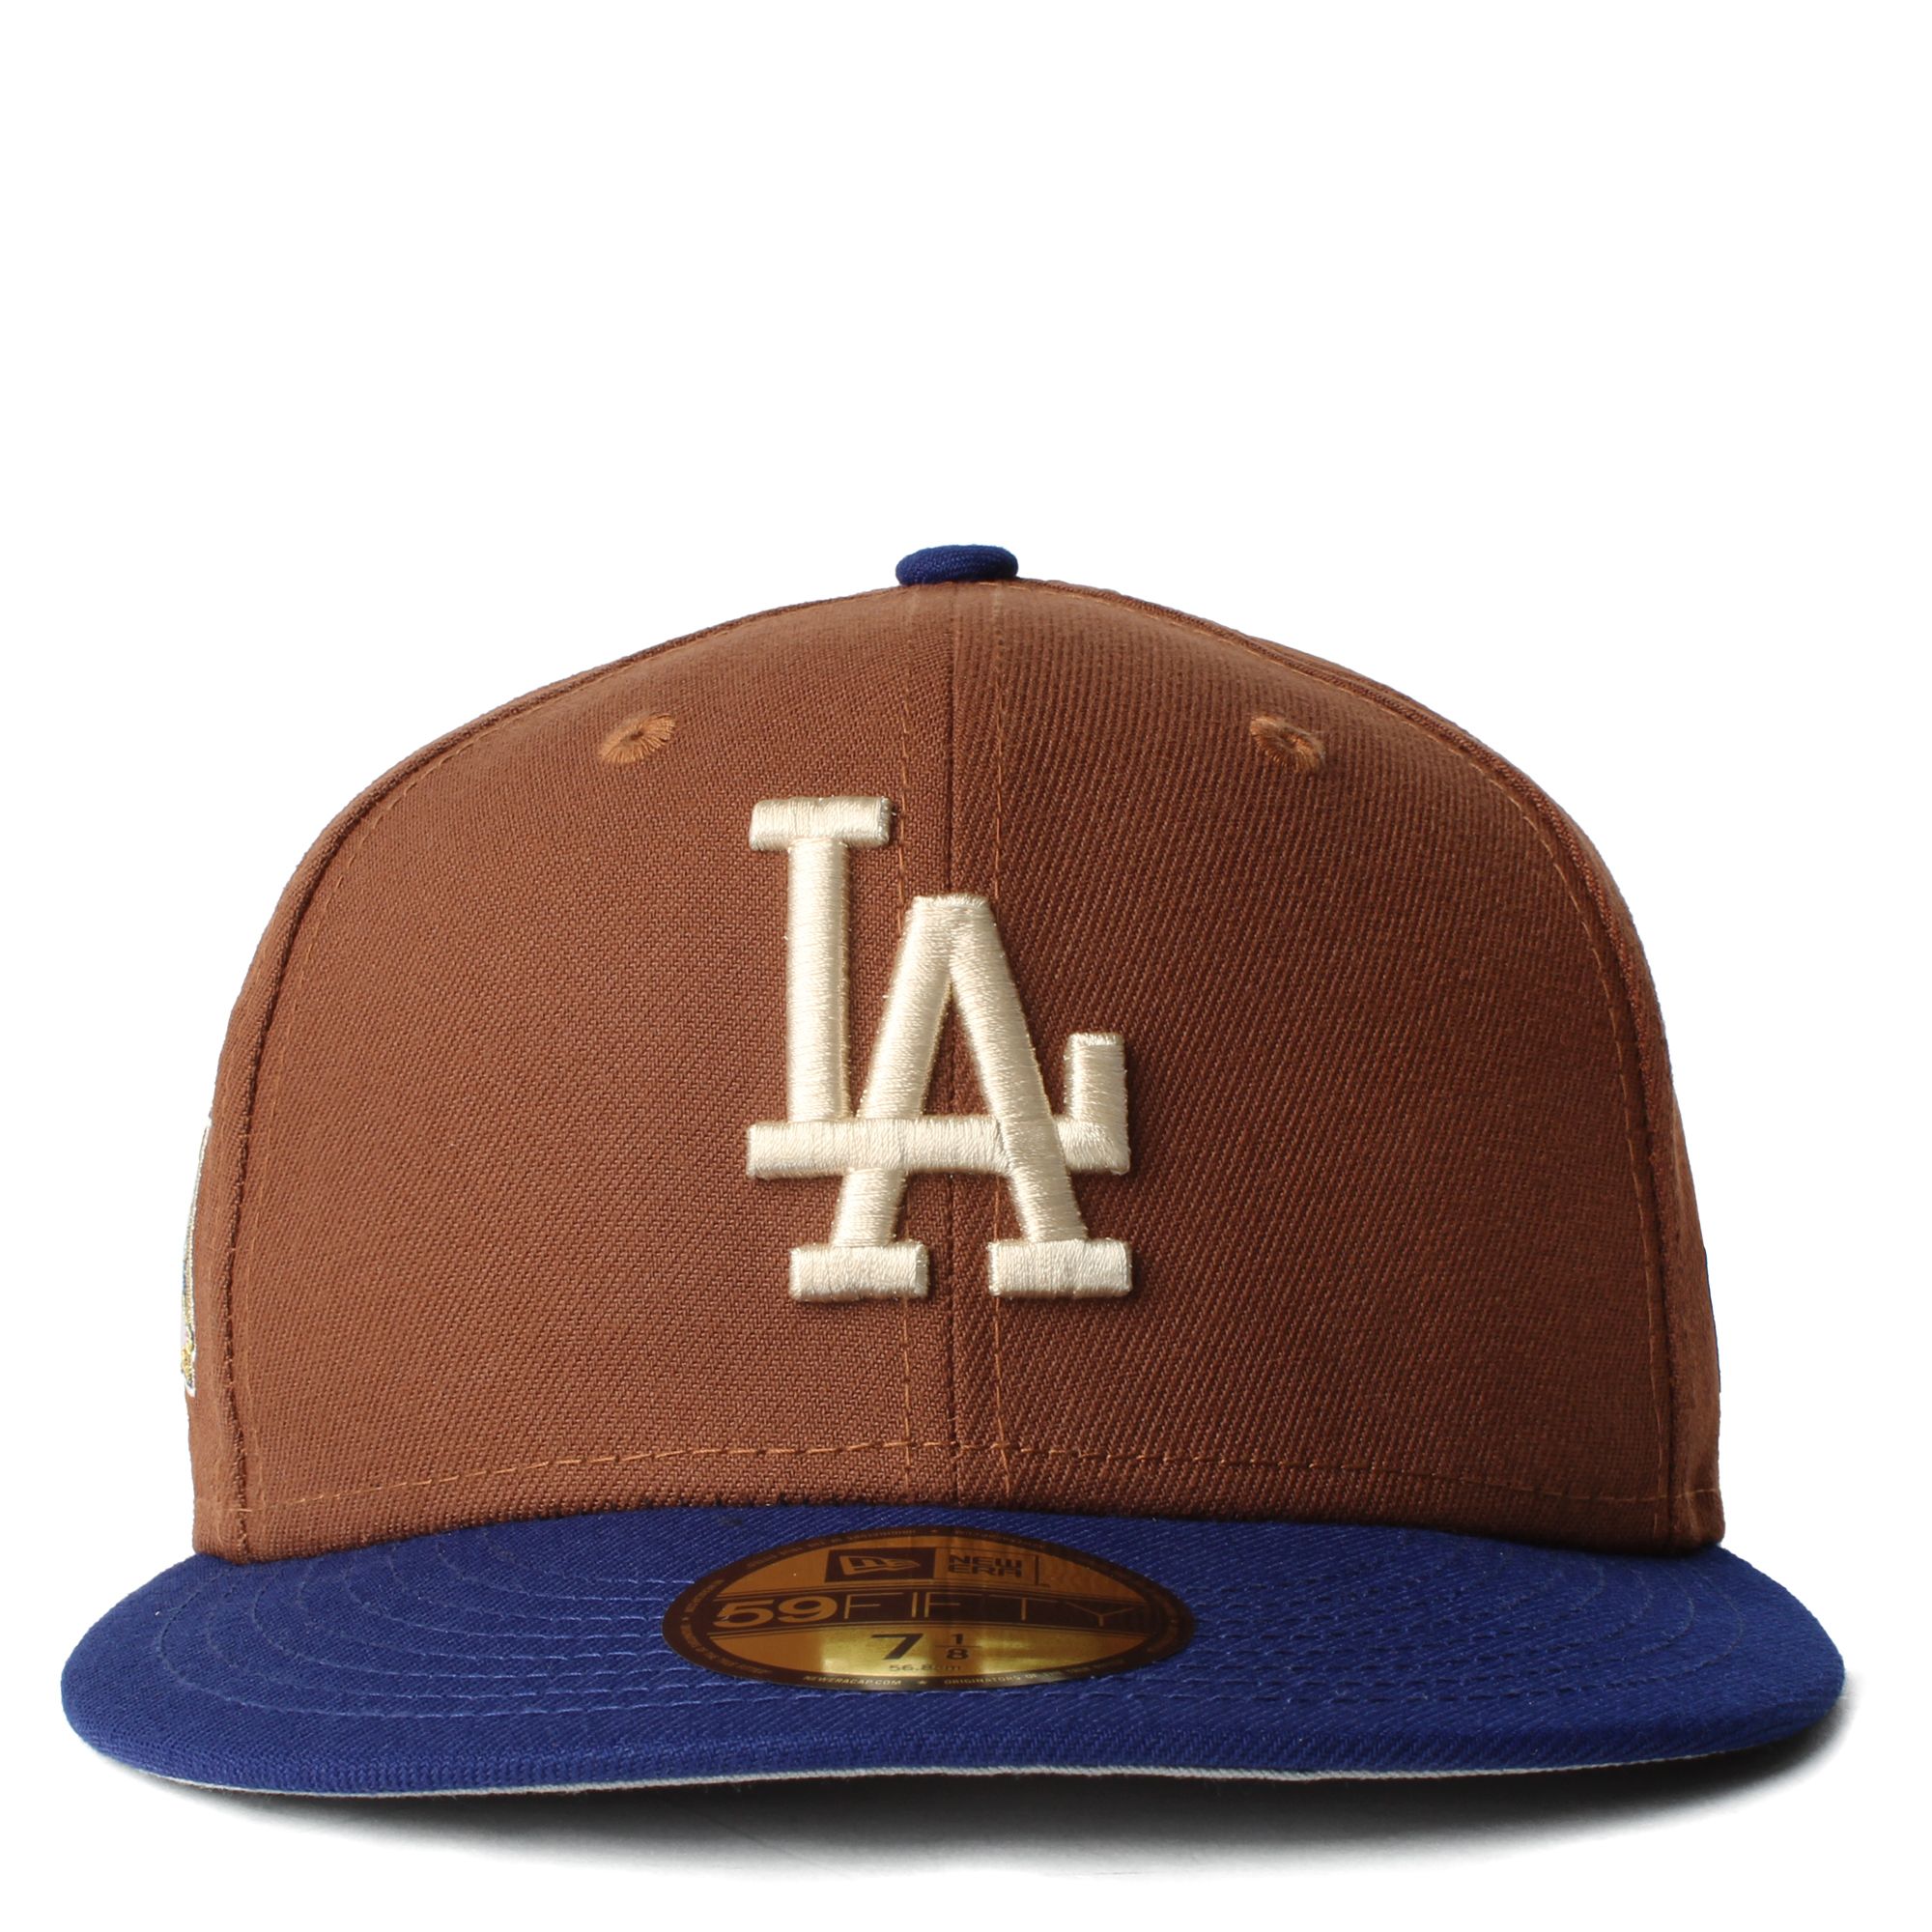 New Era Caps Los Angeles Dodgers Harvest 59FIFTY Fitted Hat Brown